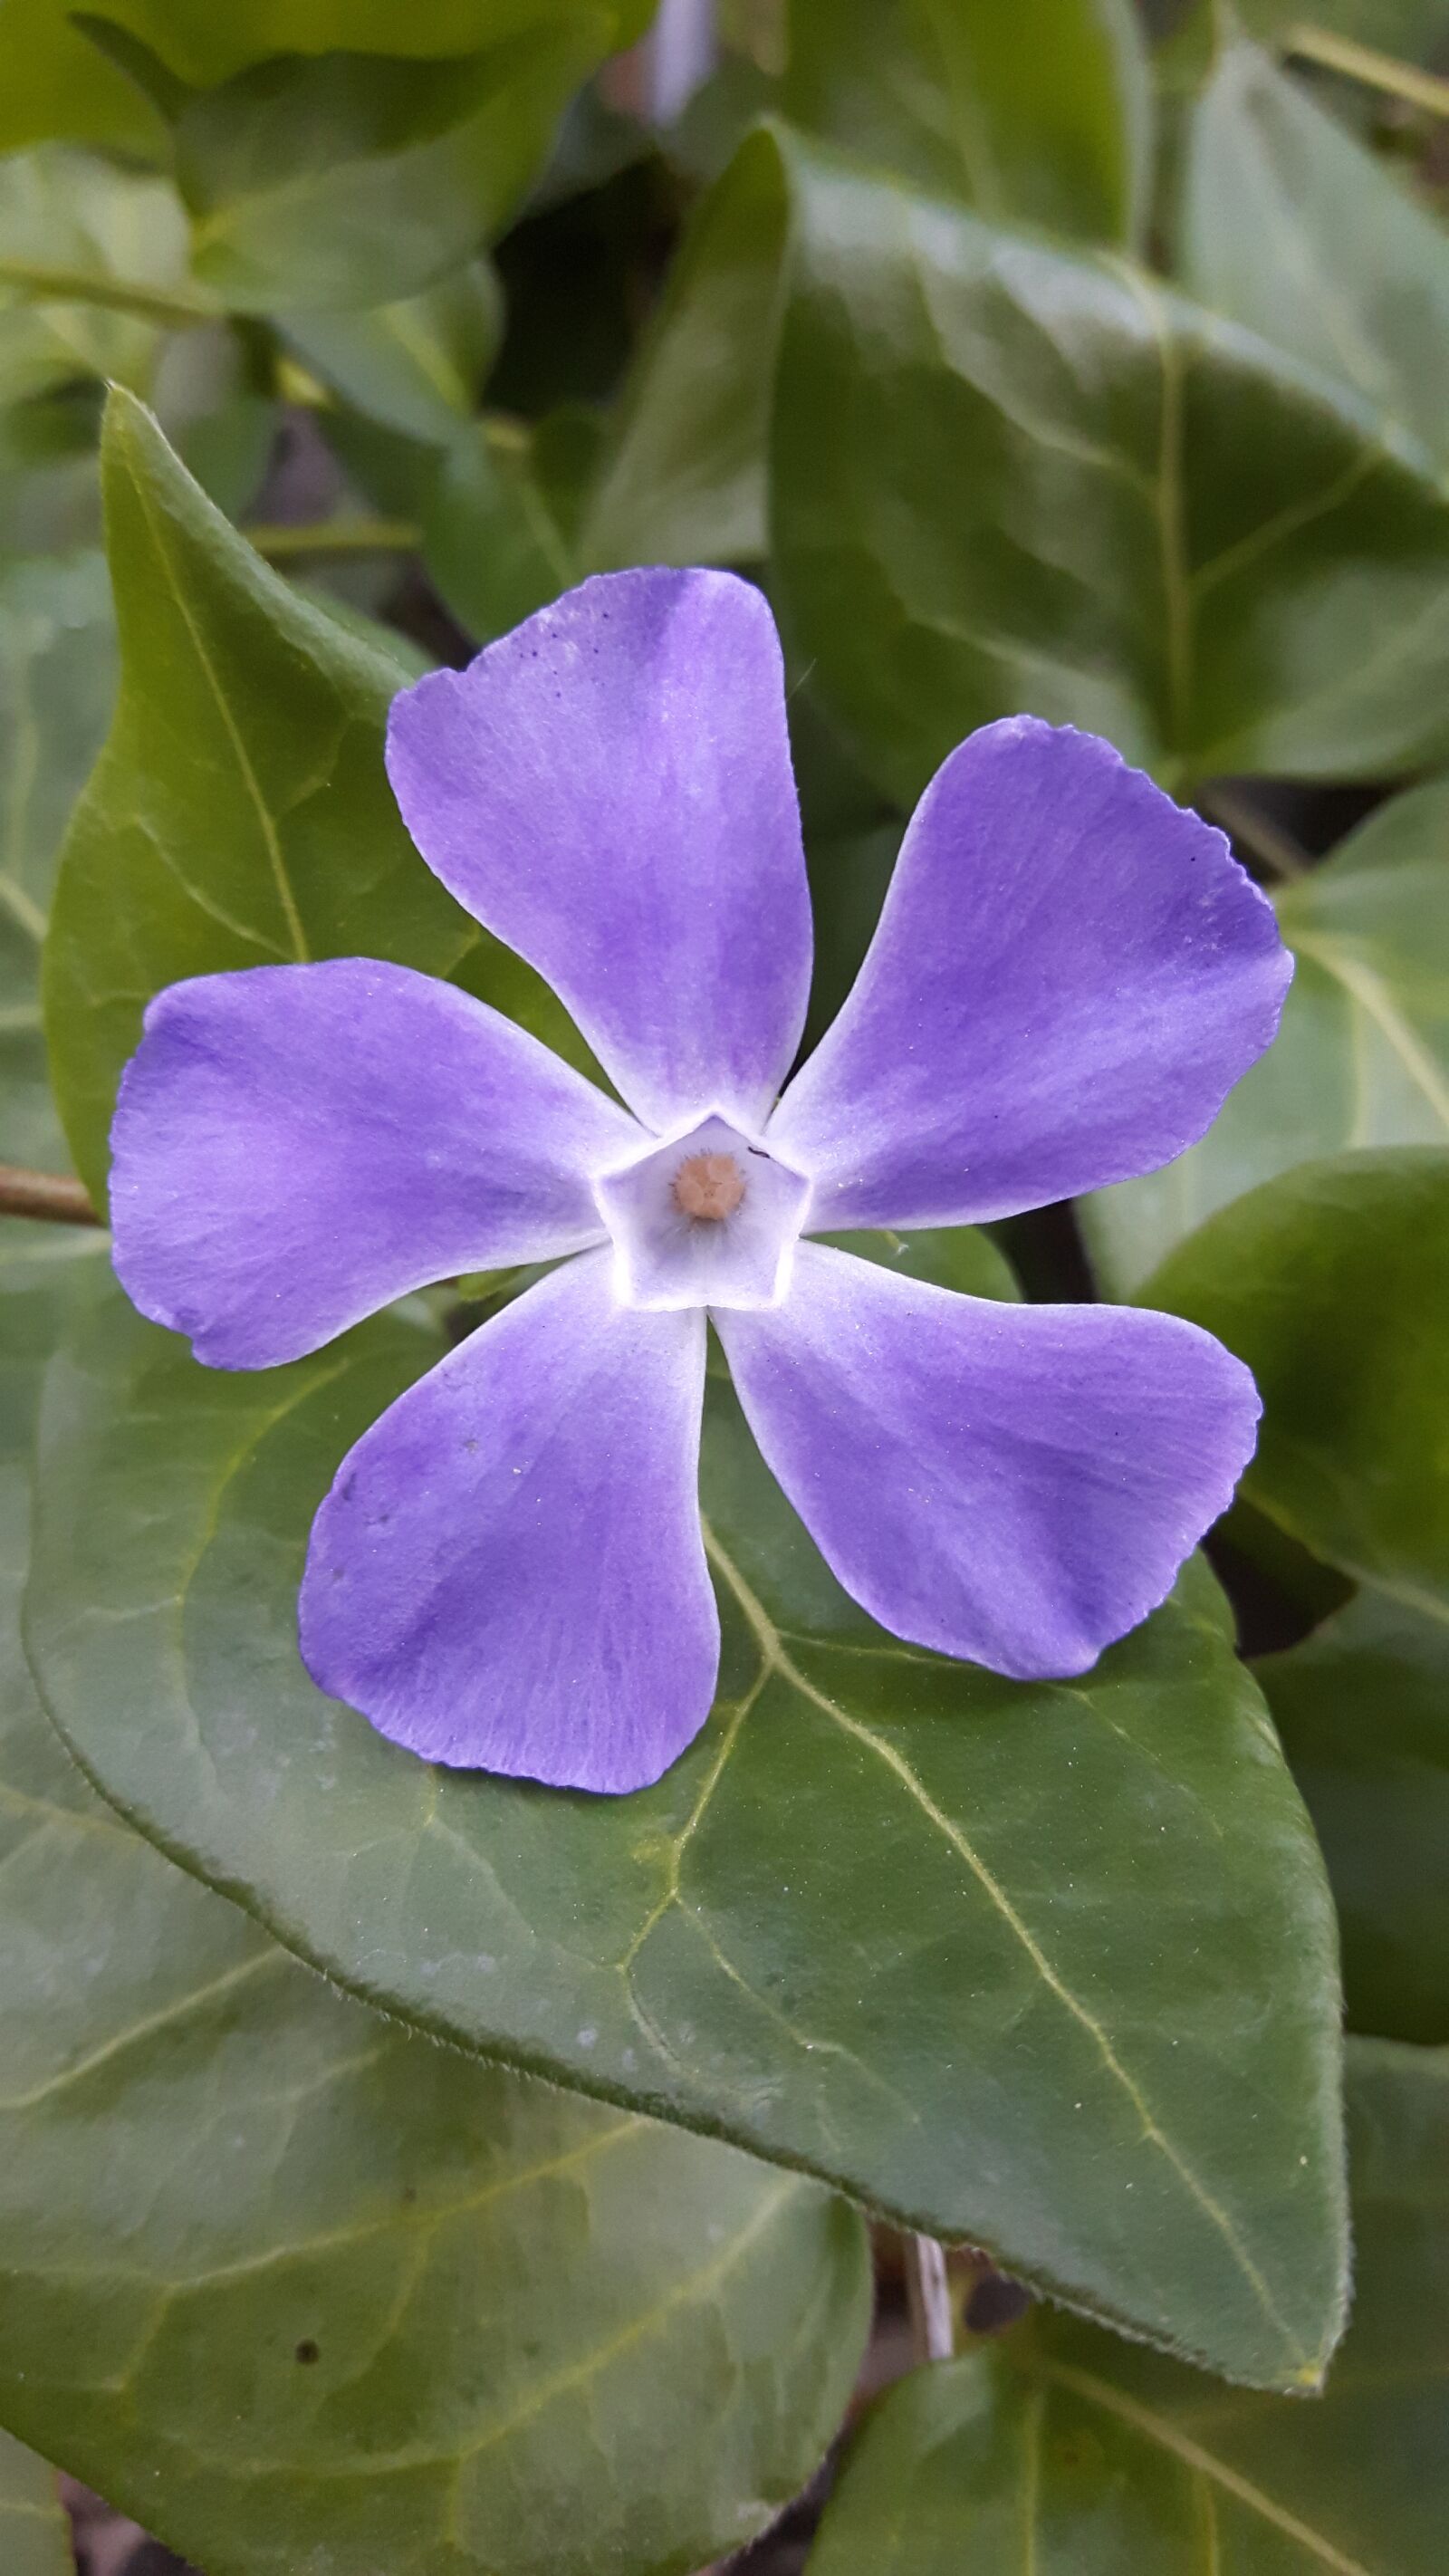 Samsung Galaxy S5 Neo sample photo. Flower, periwinkle, nature photography